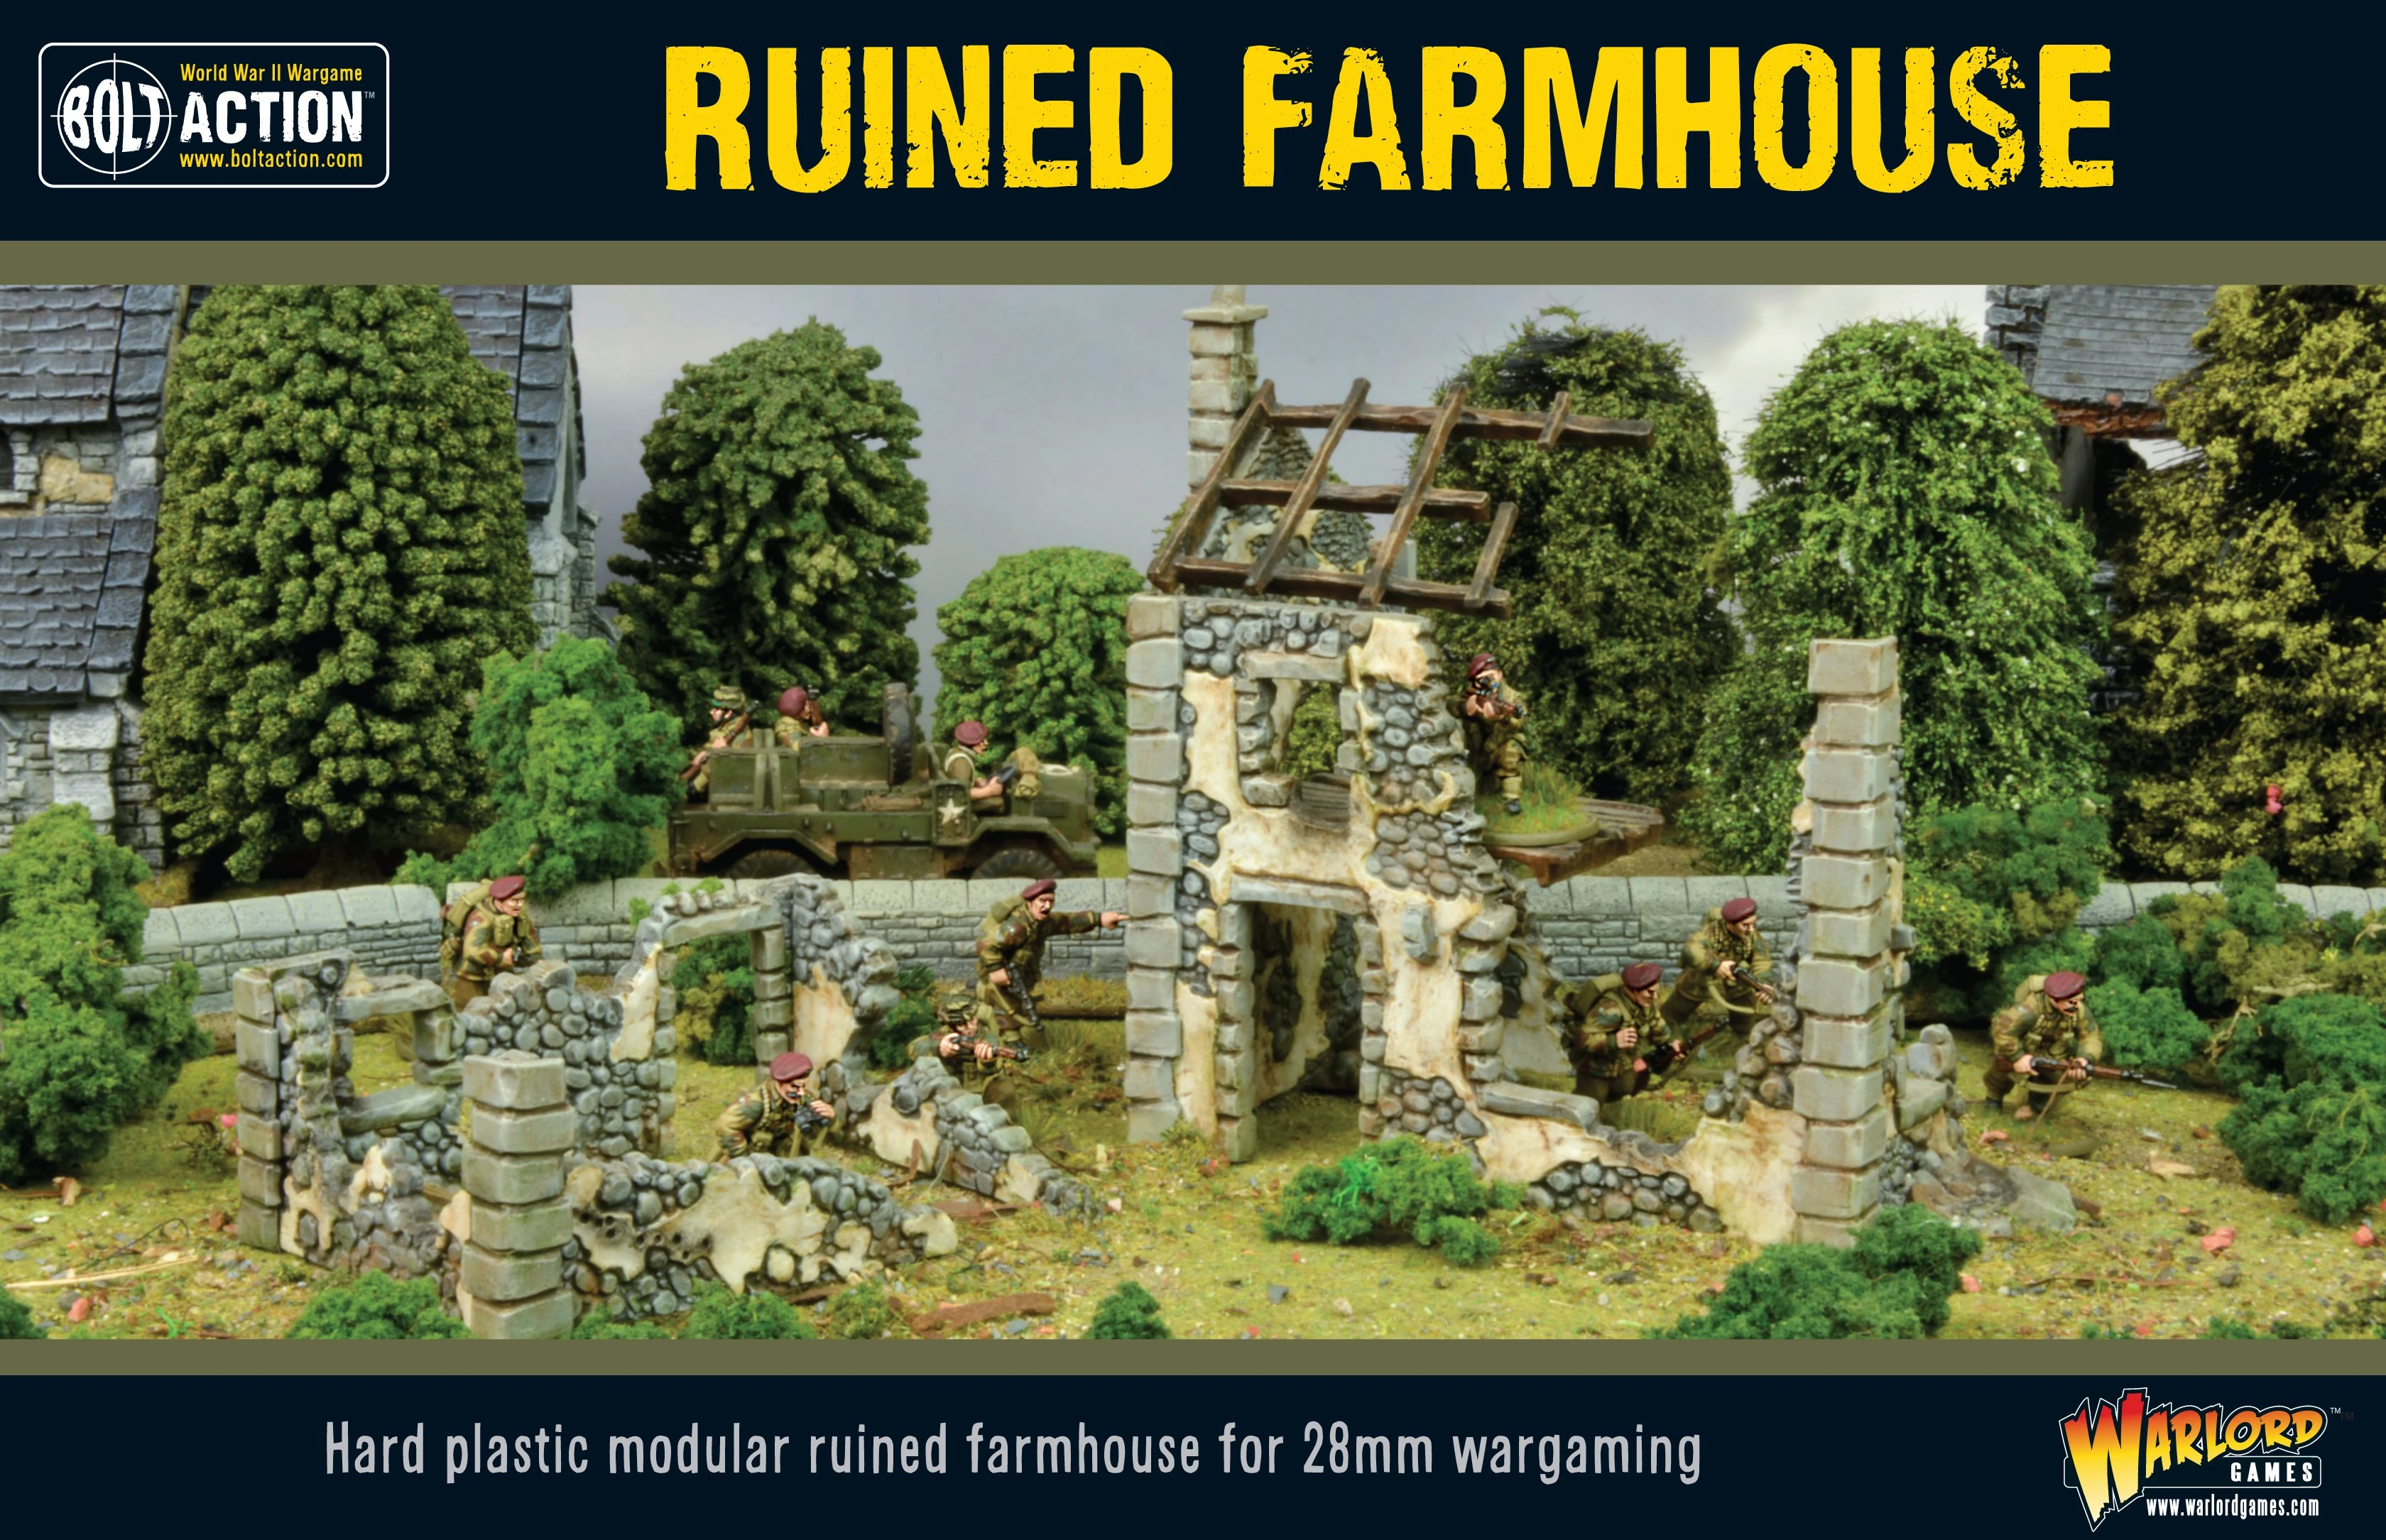 Warlord Games - Ruined Farmhouse